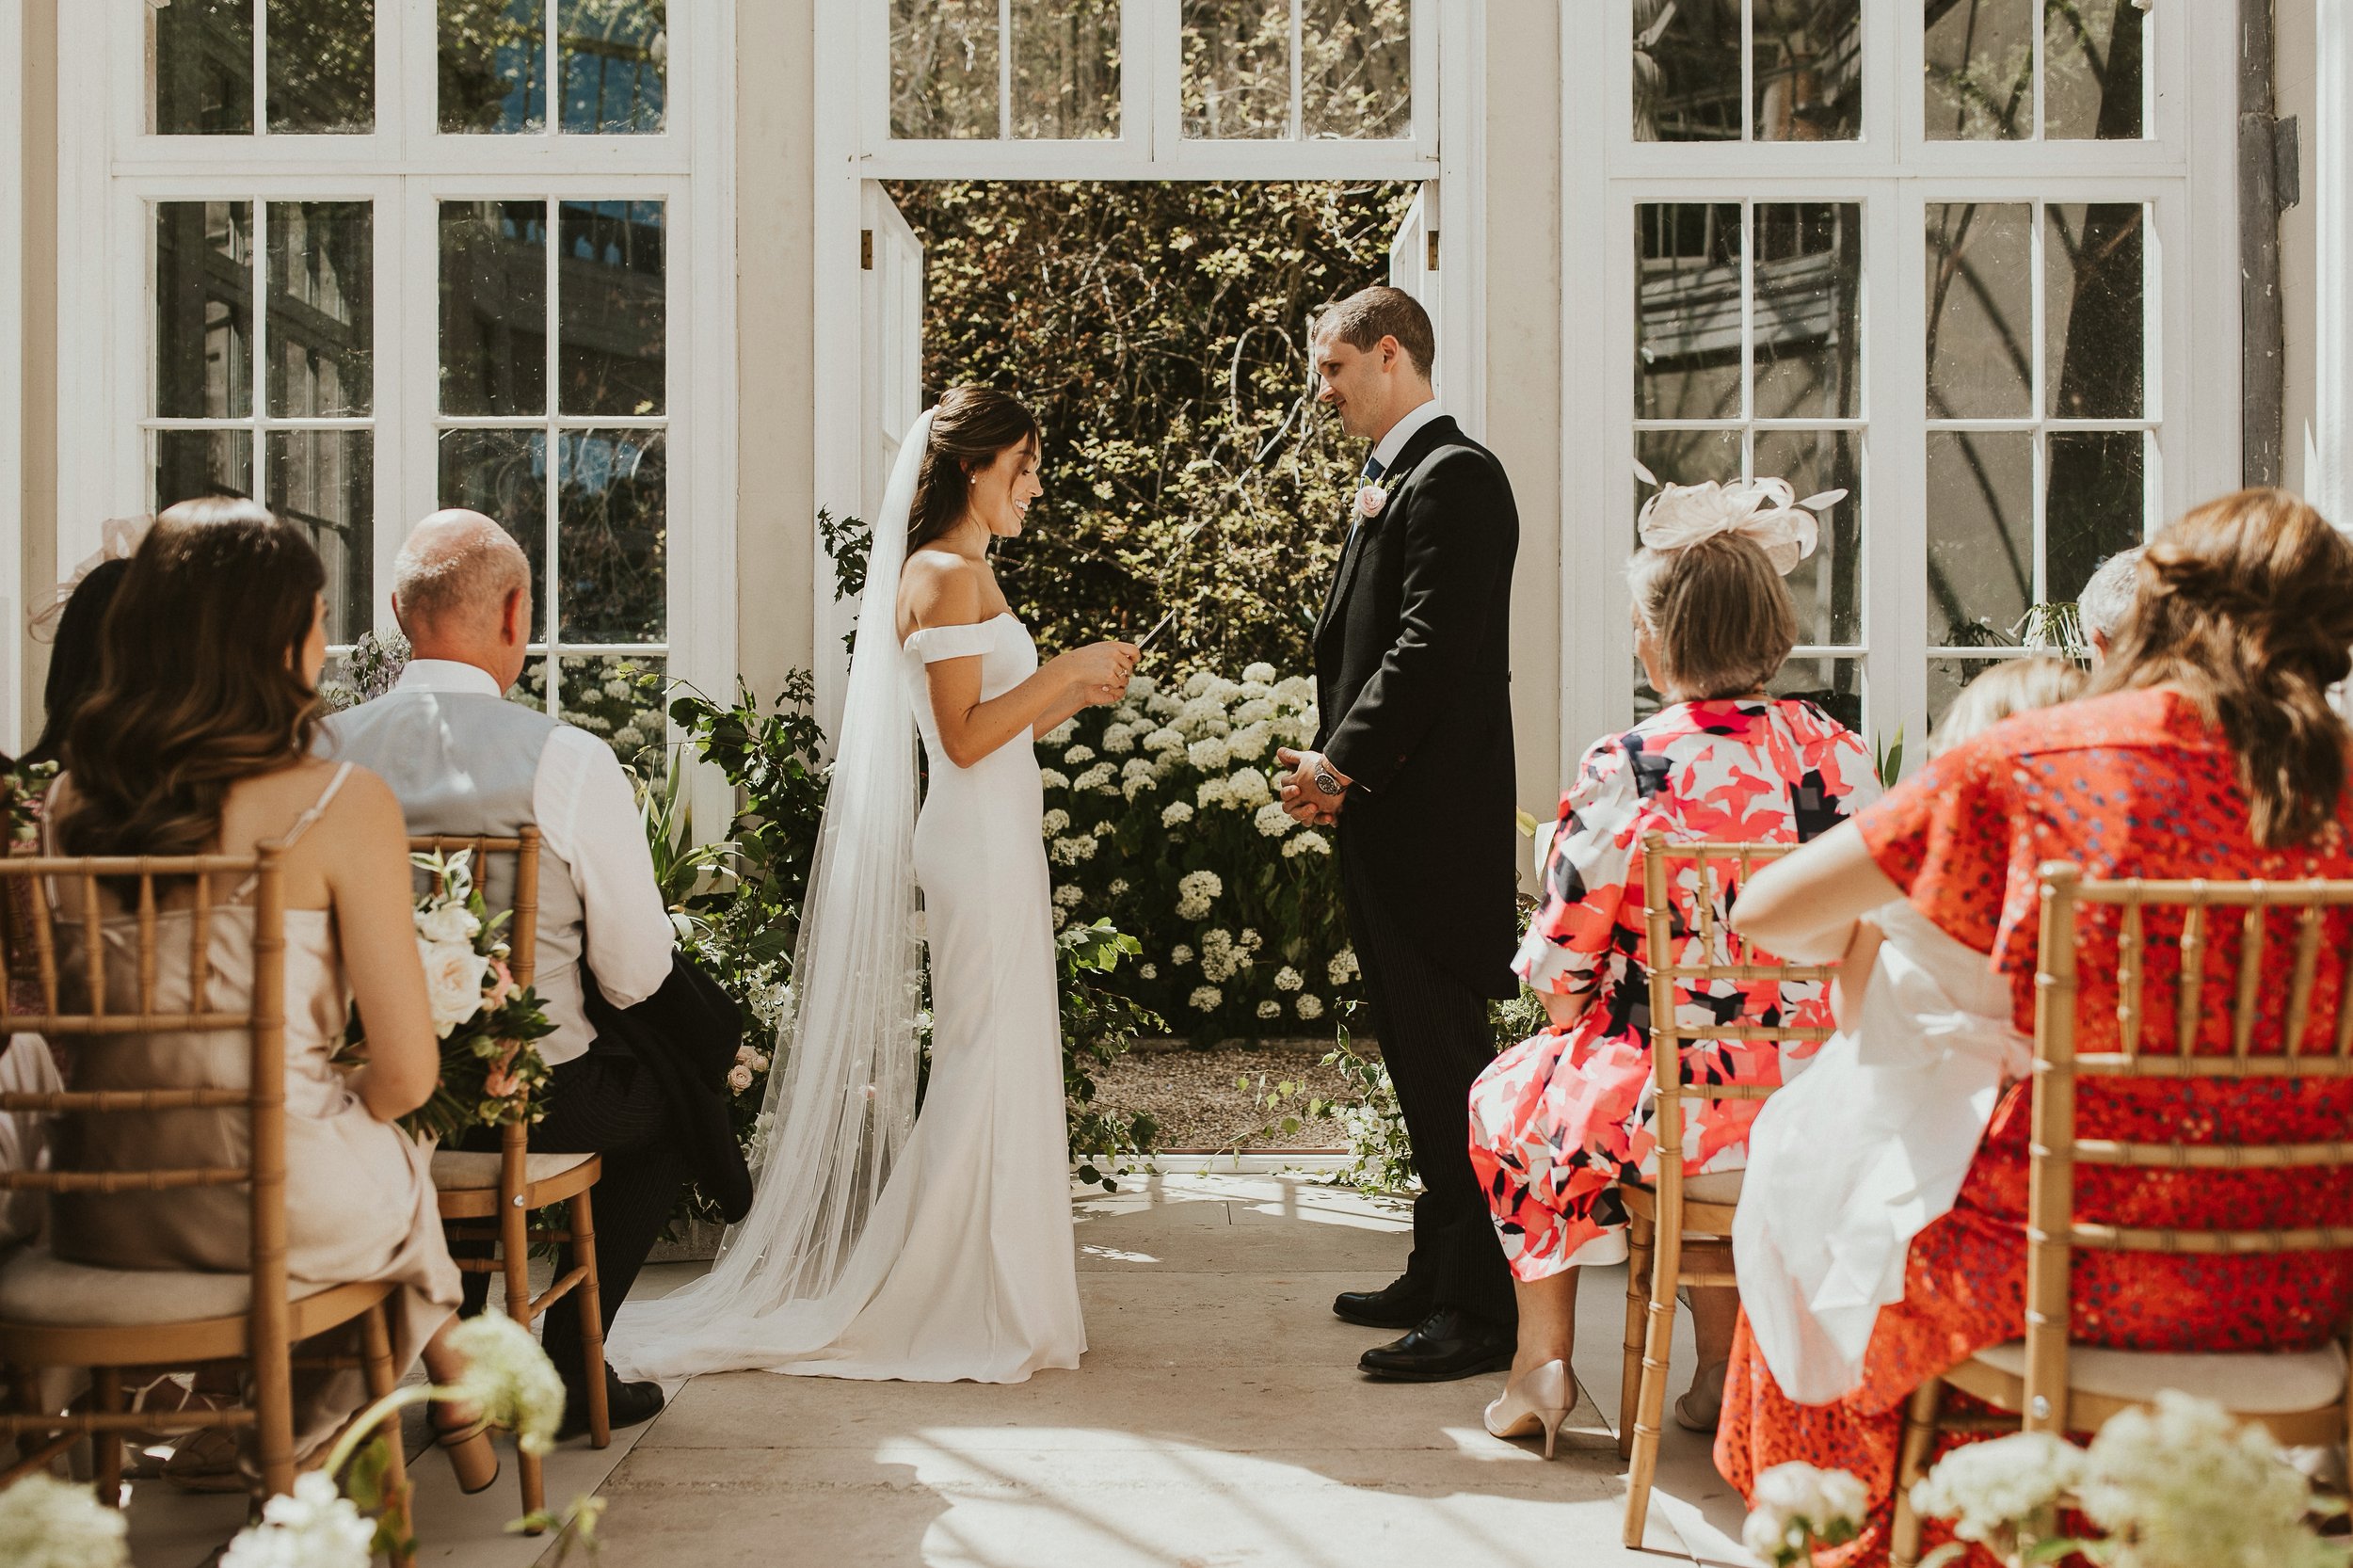 Beautiful bride Holly wore the Harbour wedding dress by Halfpenny London